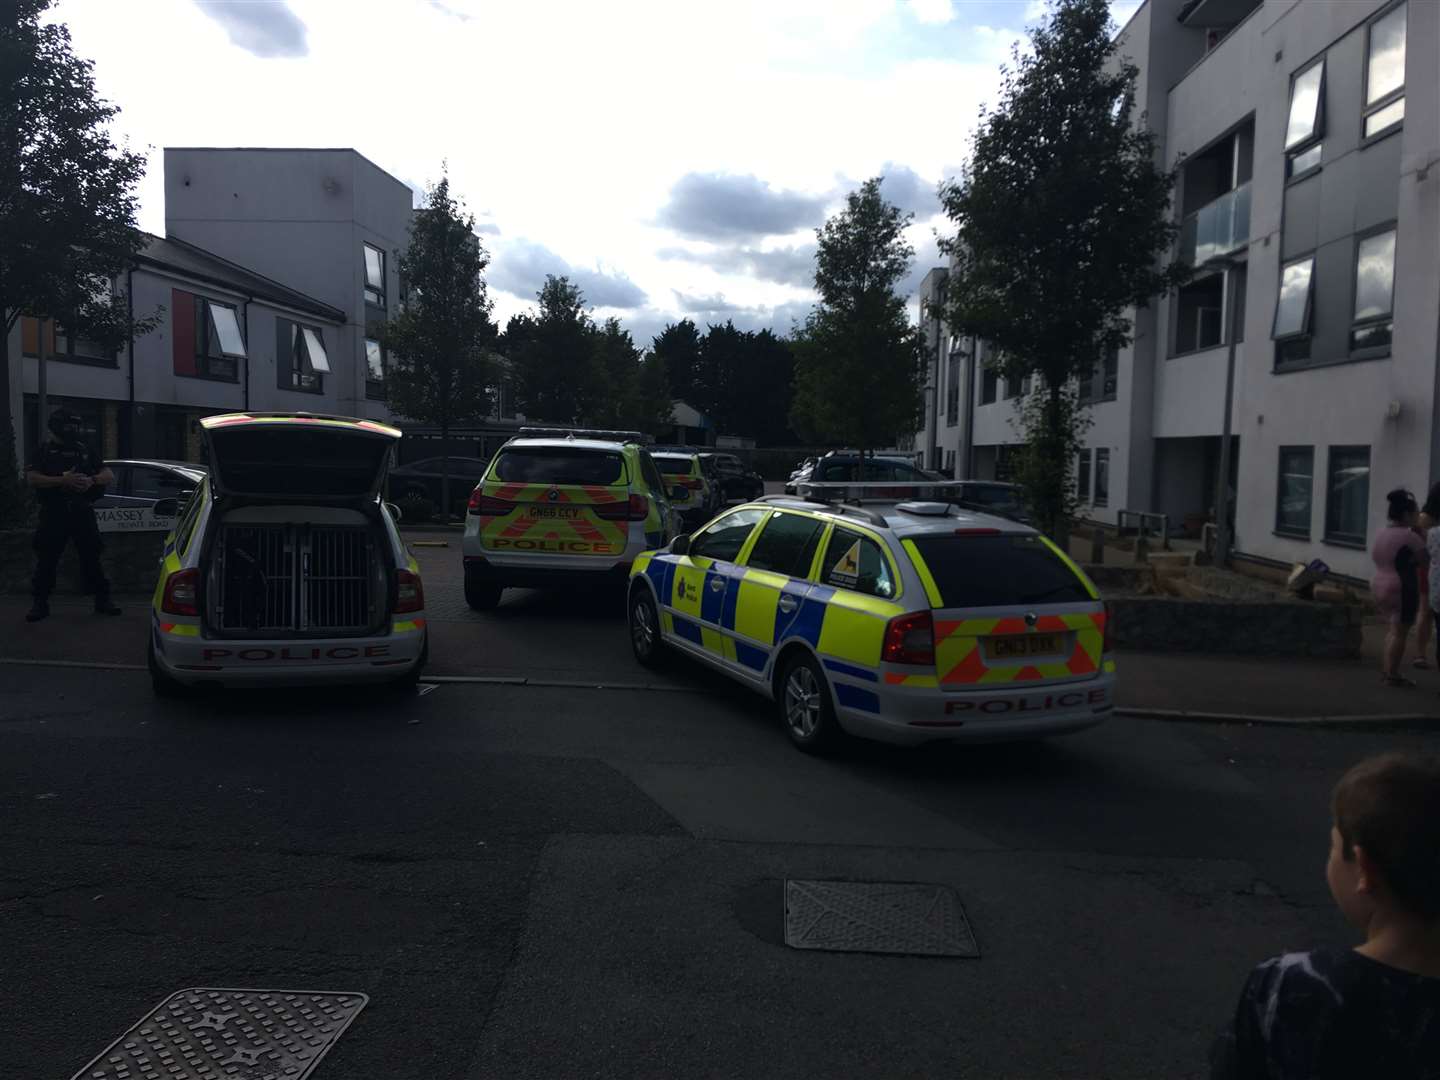 Armed police are at Massey Close